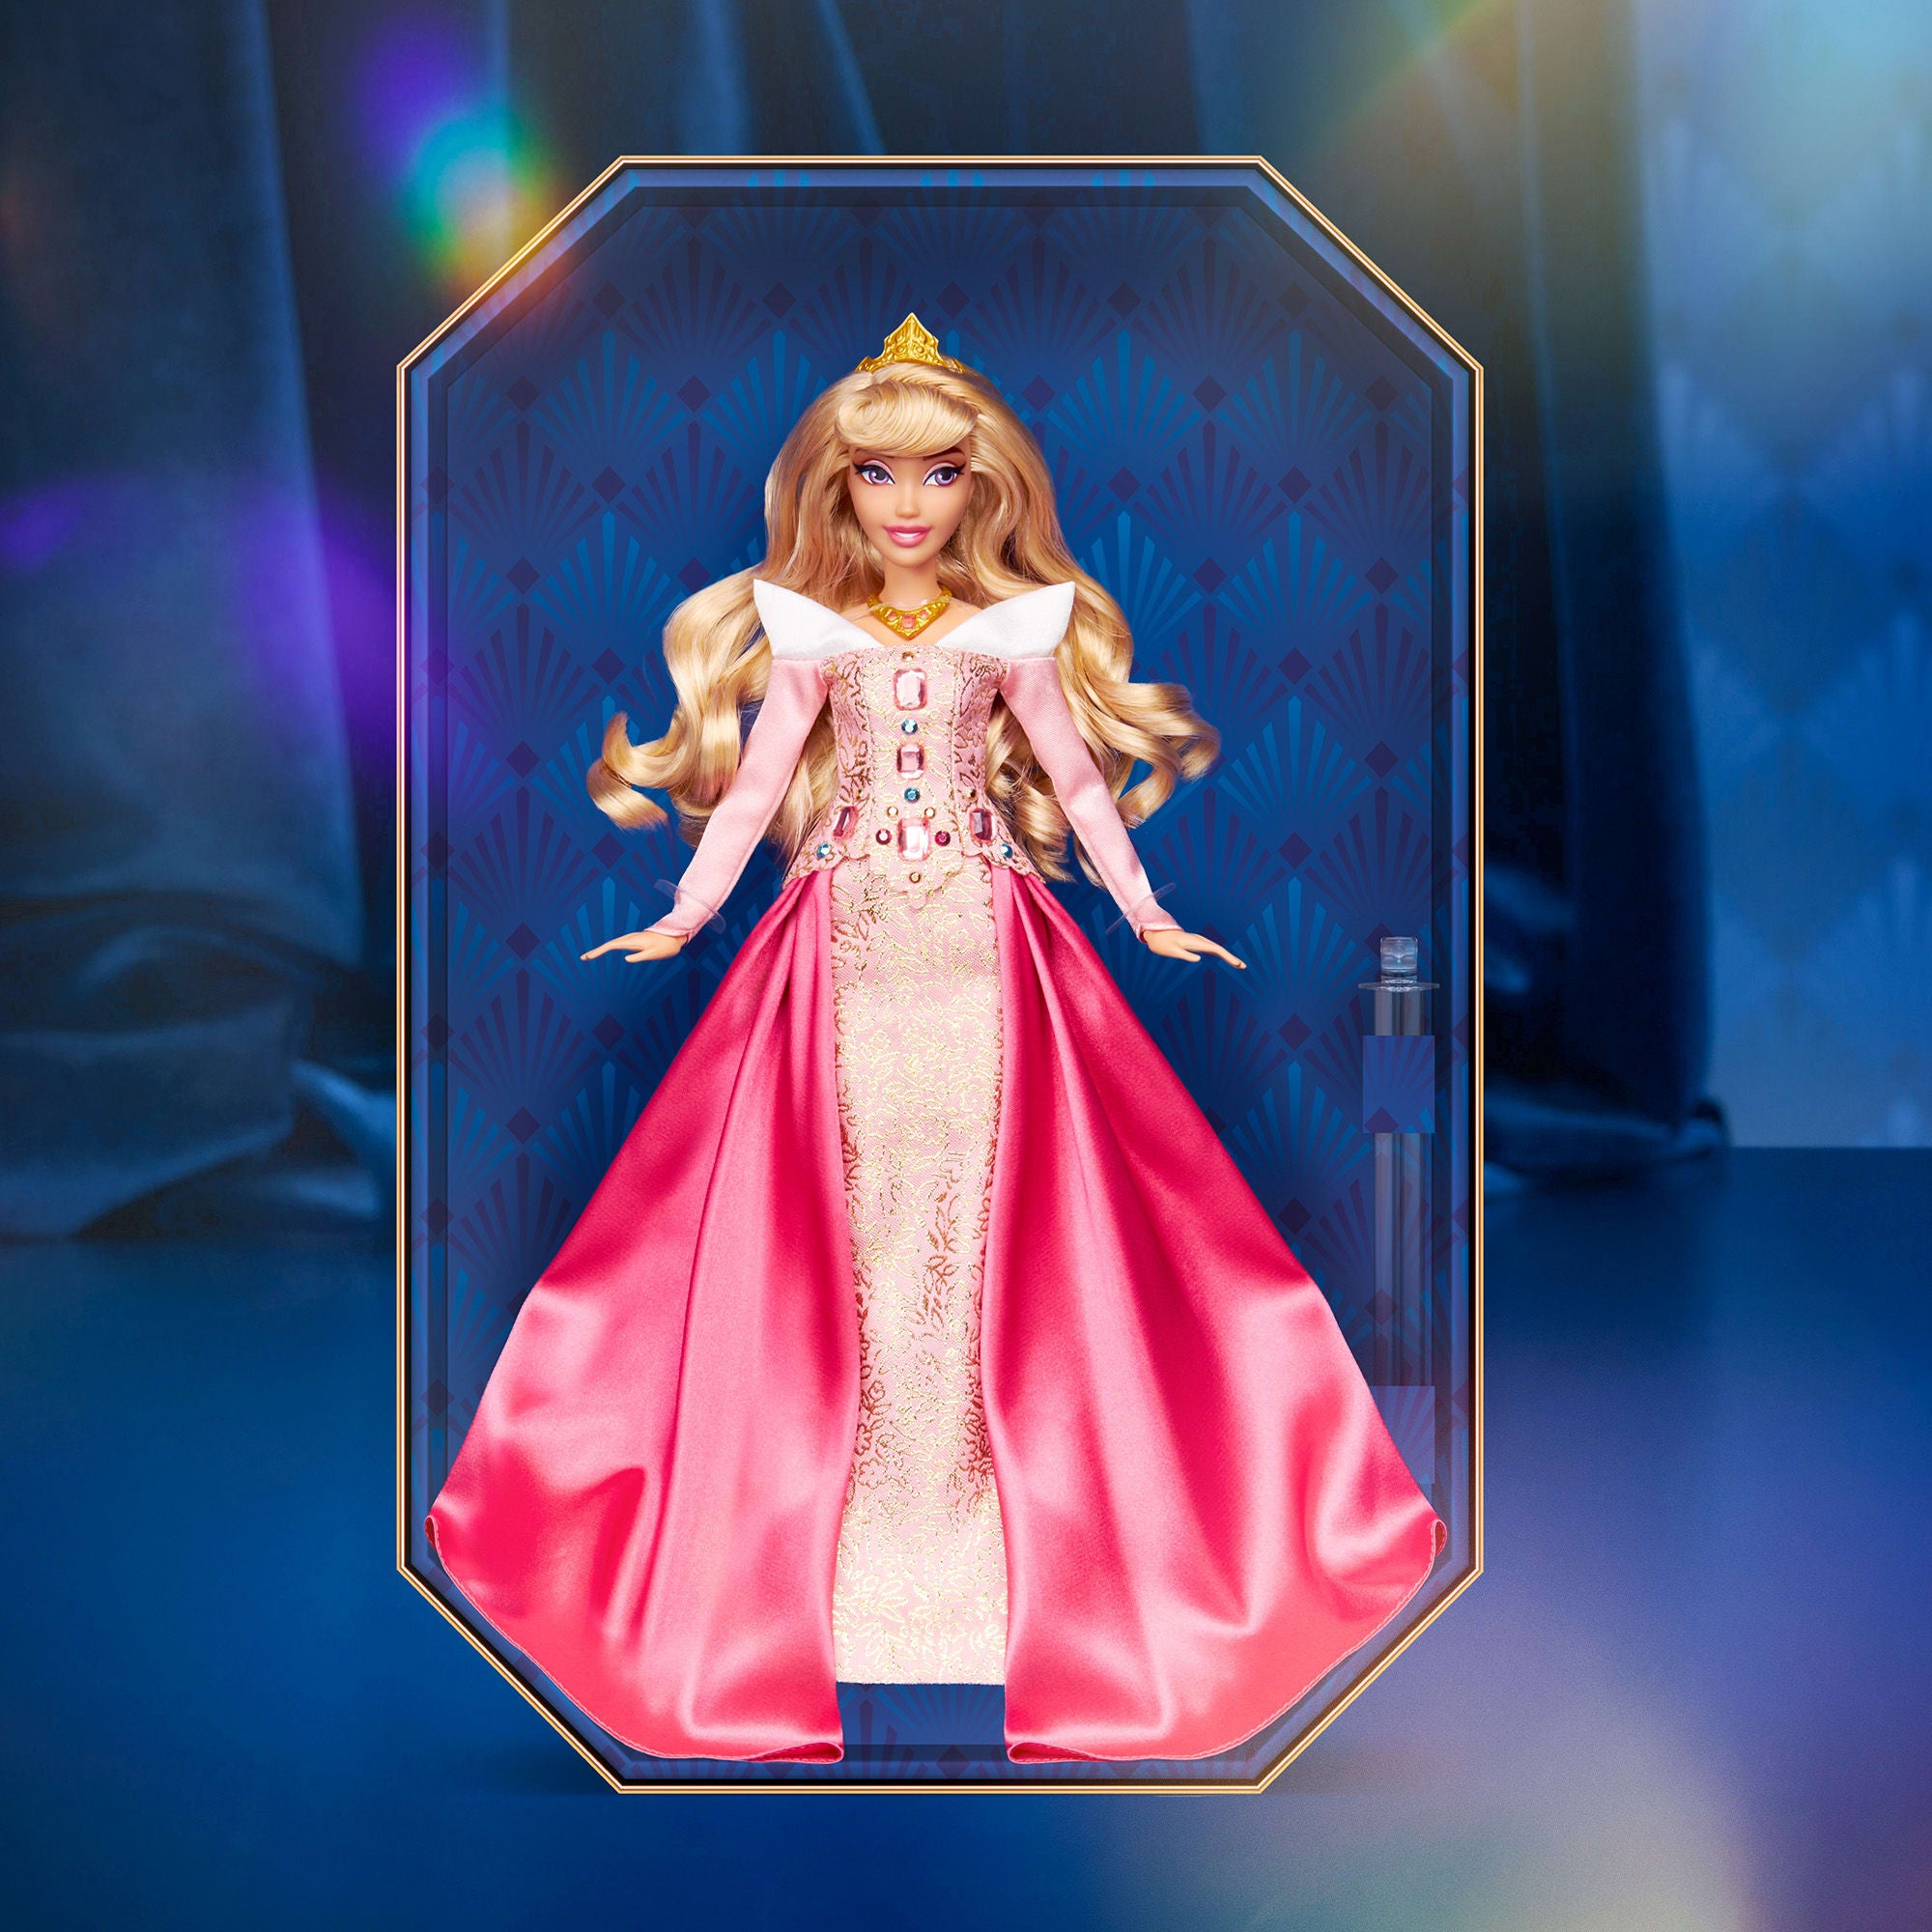 Mattel Disney Princess Dolls, Aurora Sleeping Beauty Posable Fashion Doll  with Sparkling Clothing and Accessories, Mattel Disney Movie Toys